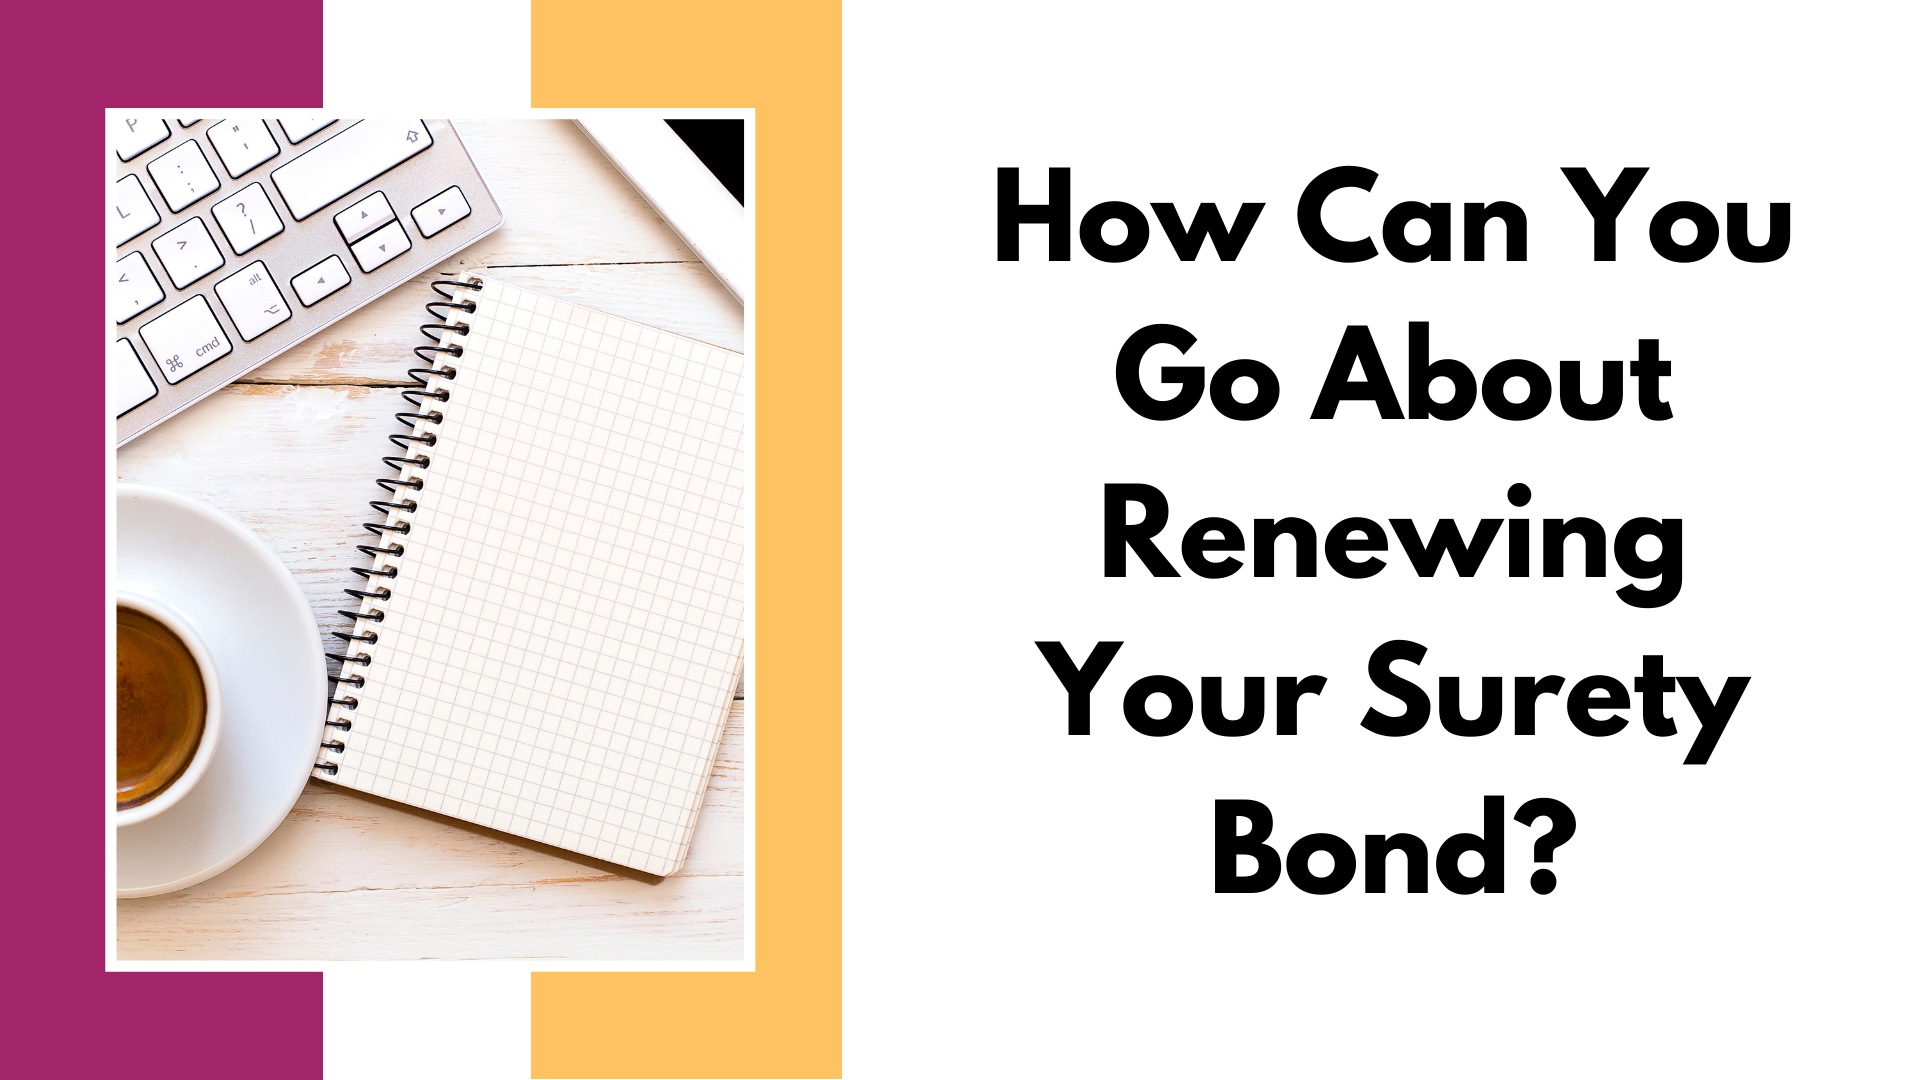 surety bond - What is a surety bond and what are its purposes - workspace